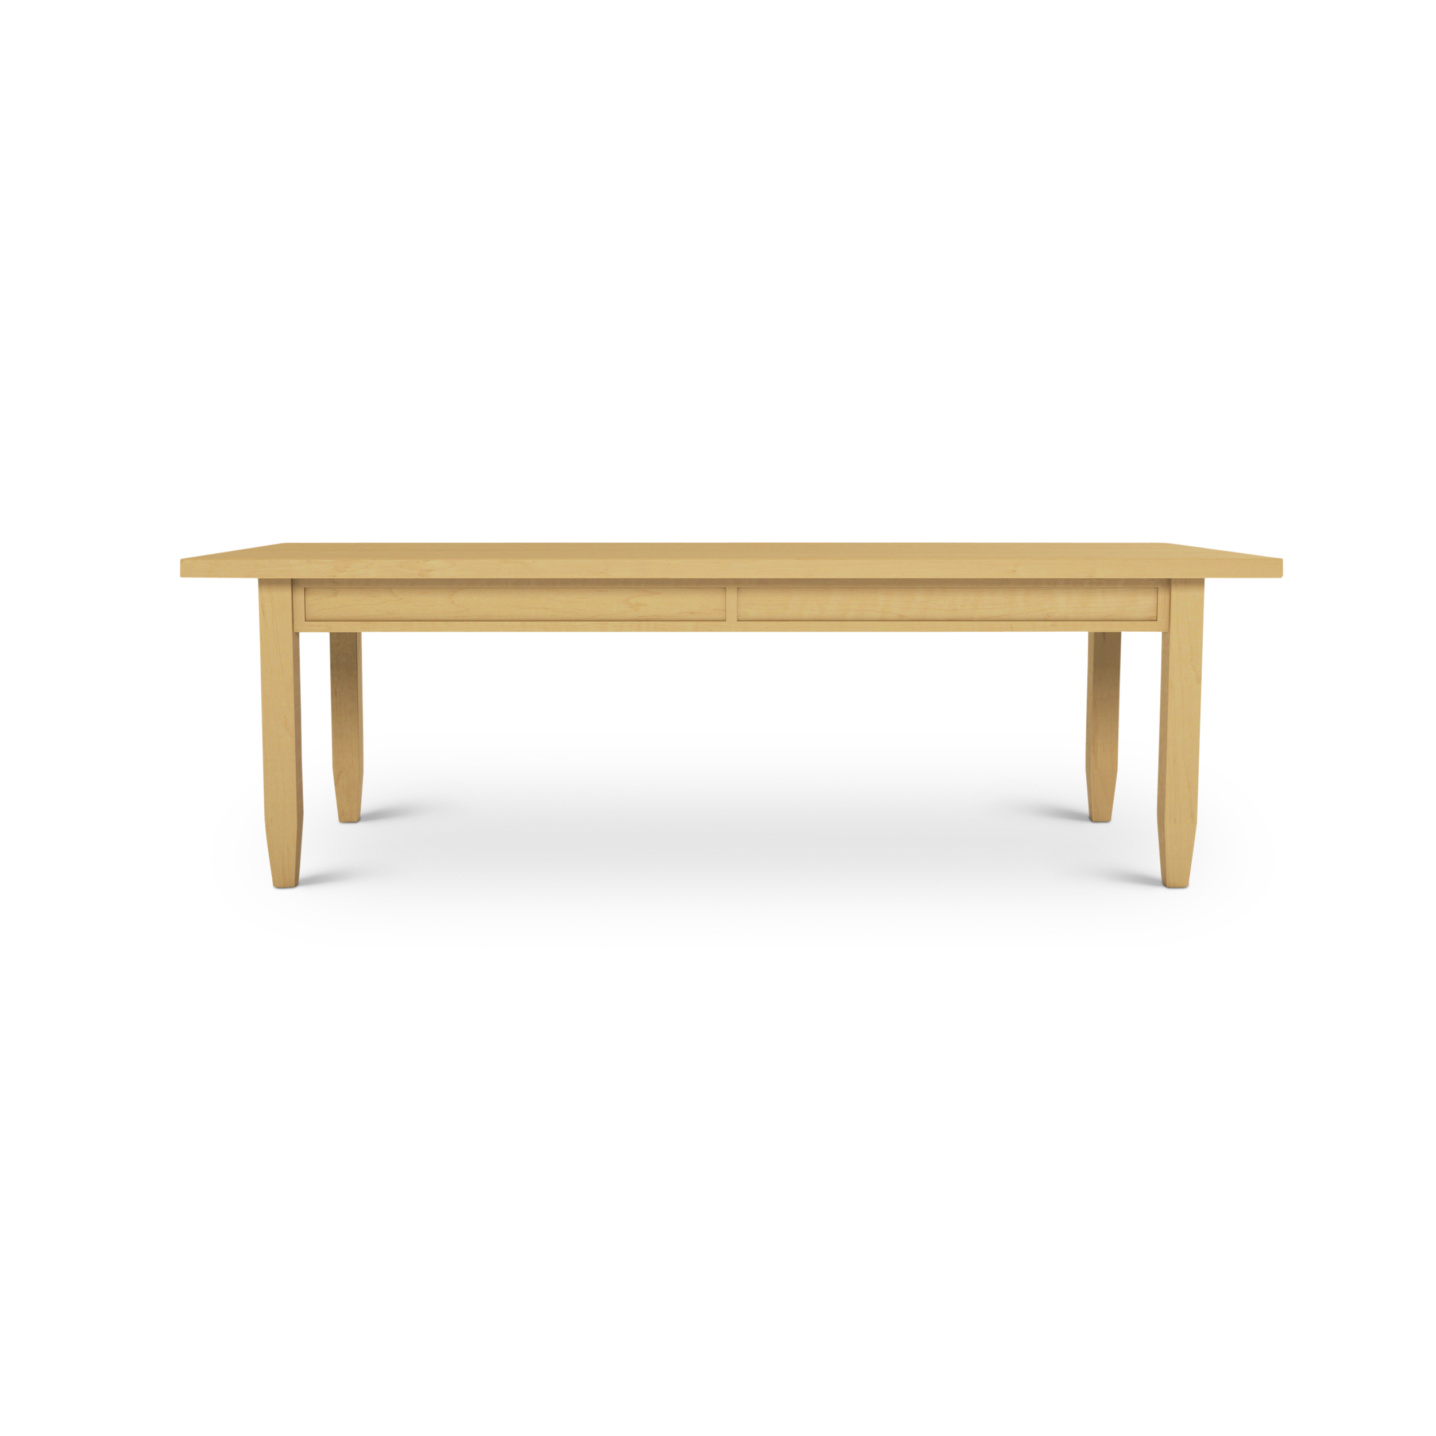 Solid maple dining table with a thick top